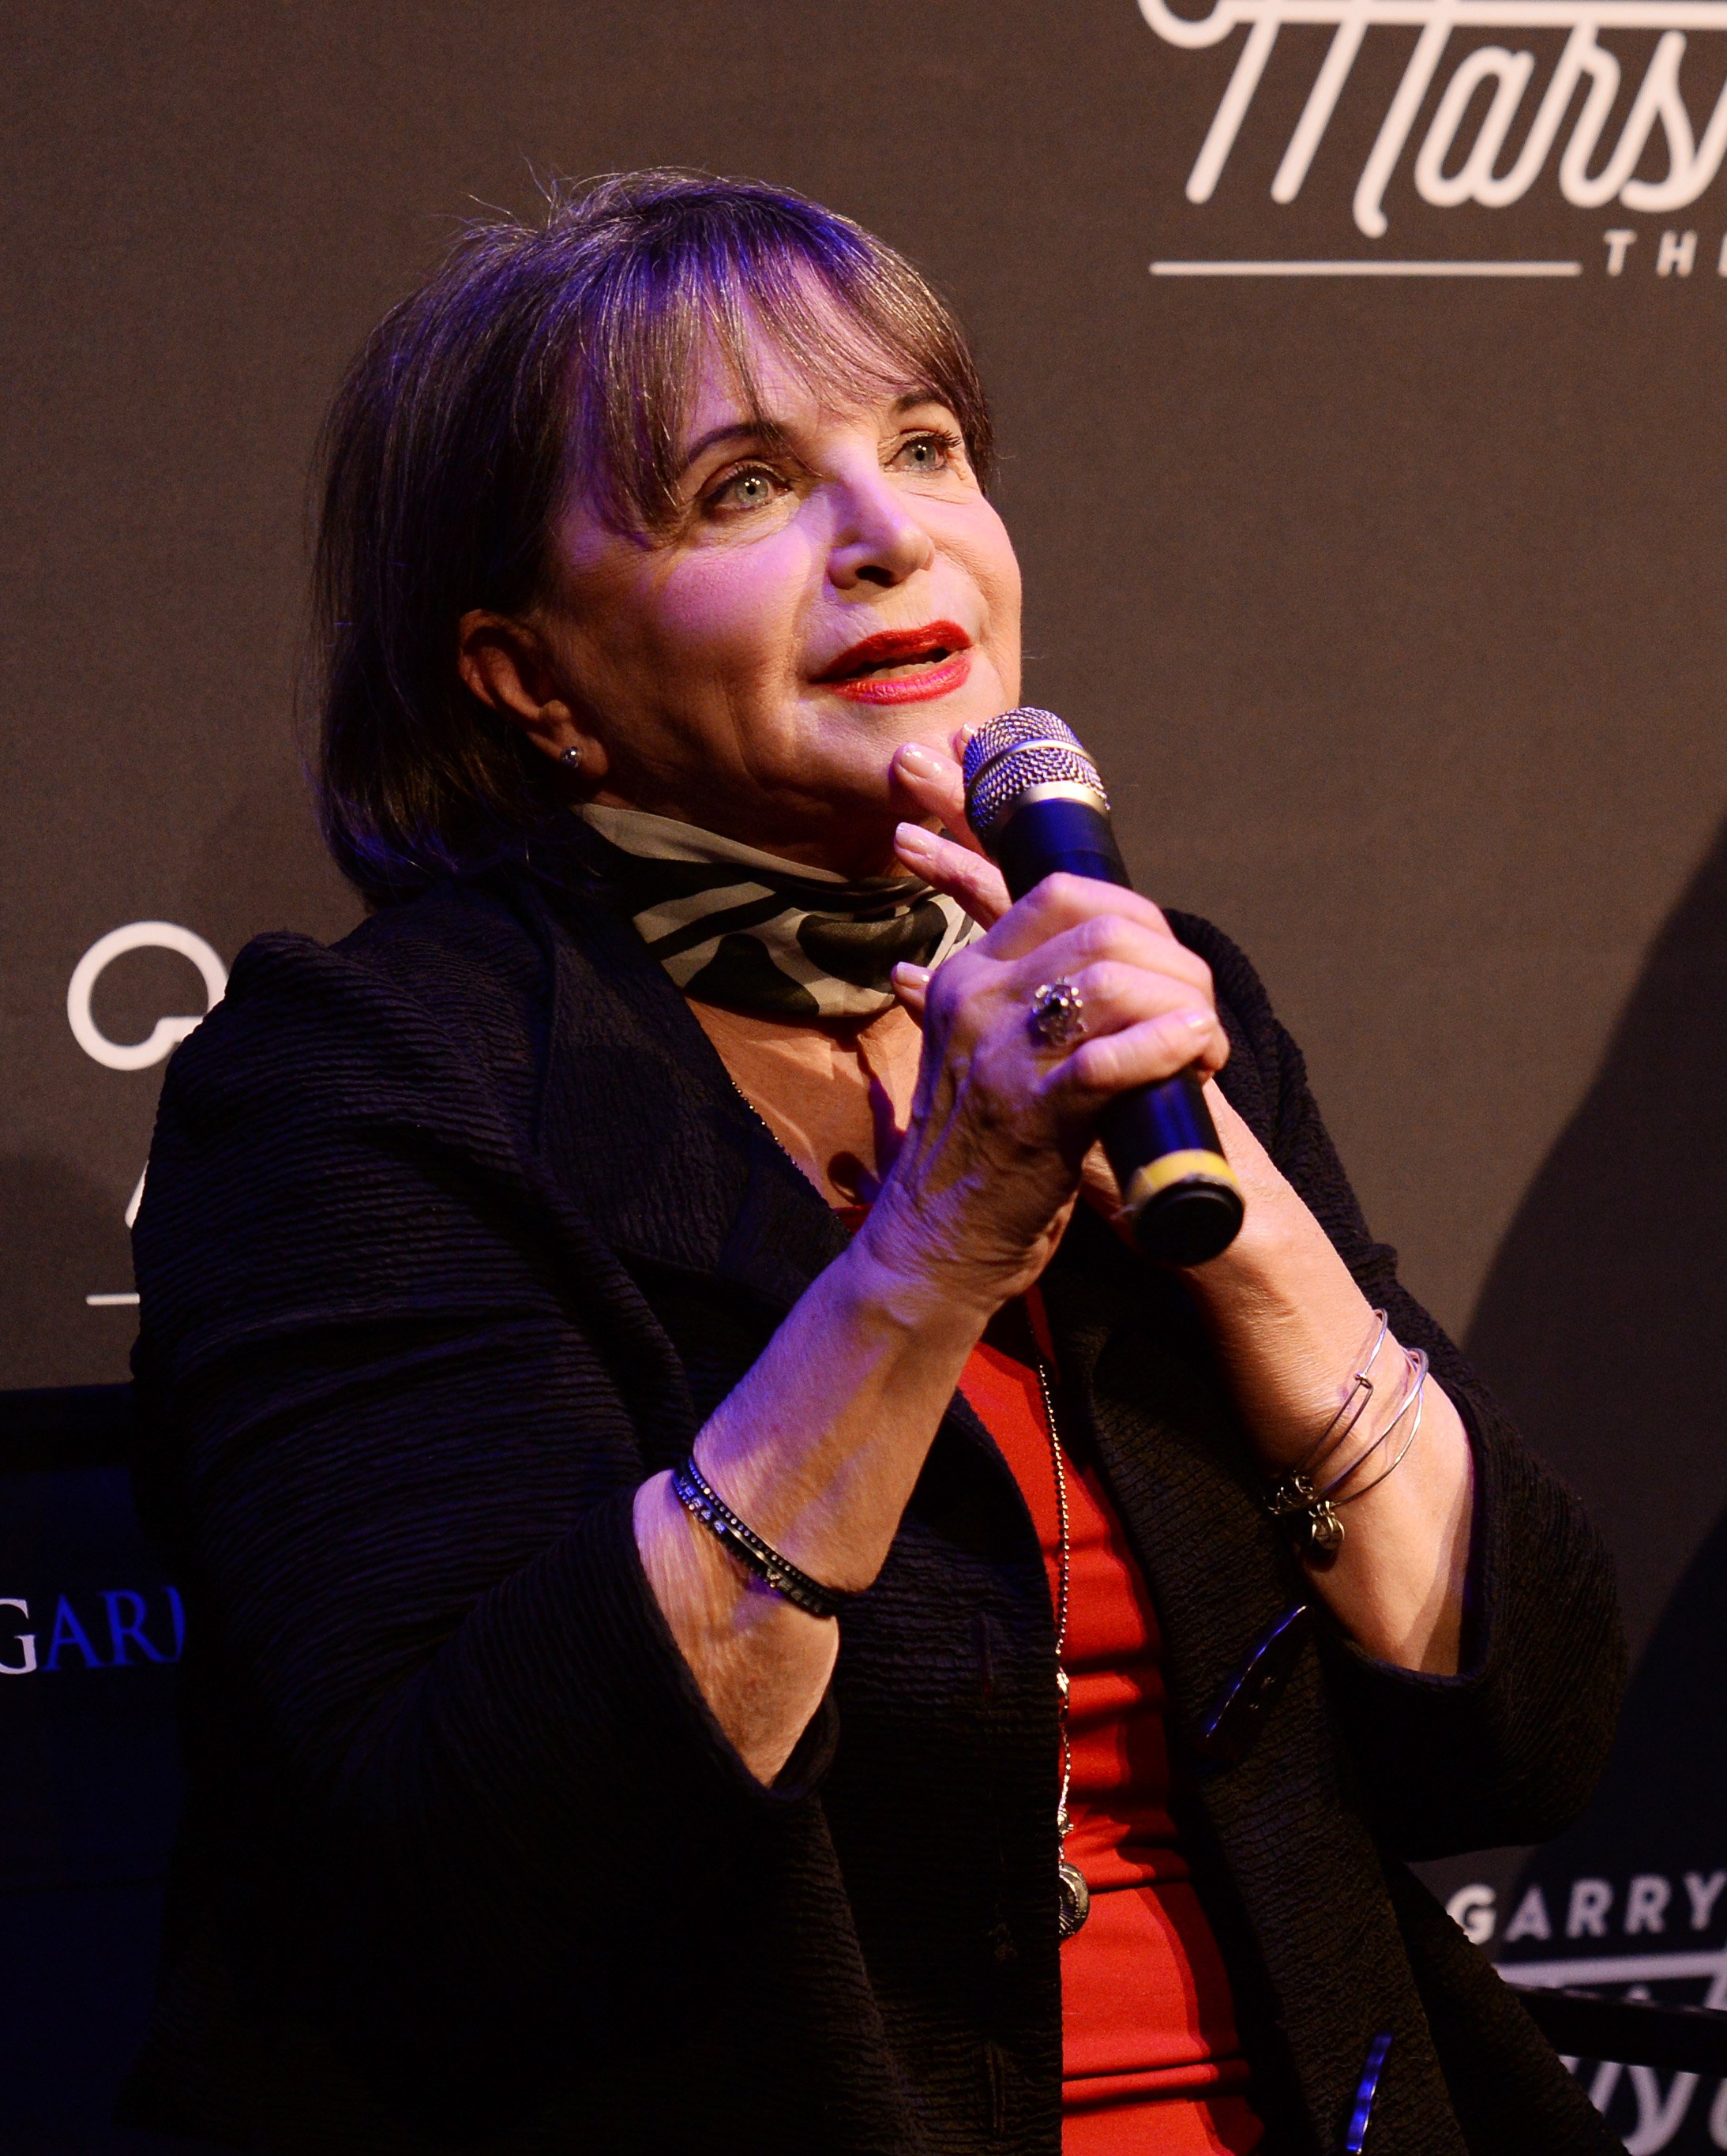 Cindy Williams attends the "Laverne & Shirley" Marathon - A Salute To Penny Marshall event at the Garry Marshall Theatre on January 27, 2019 in Burbank, California | Source: Getty Images 